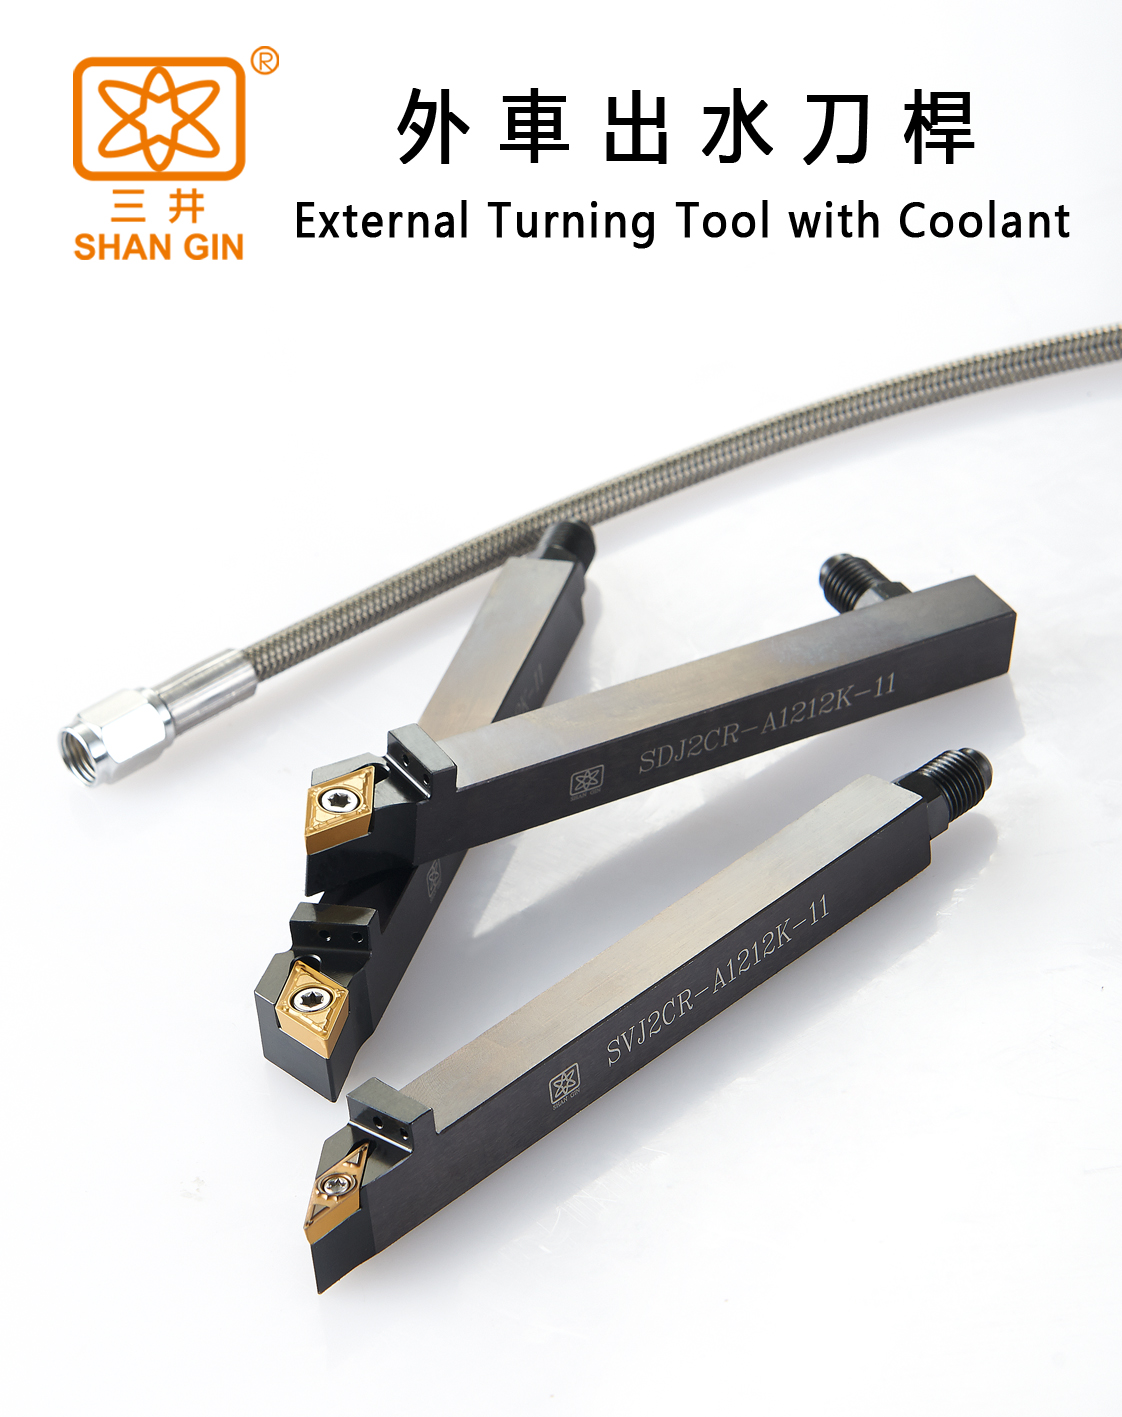 Products|External Turning Tool  with Coolant